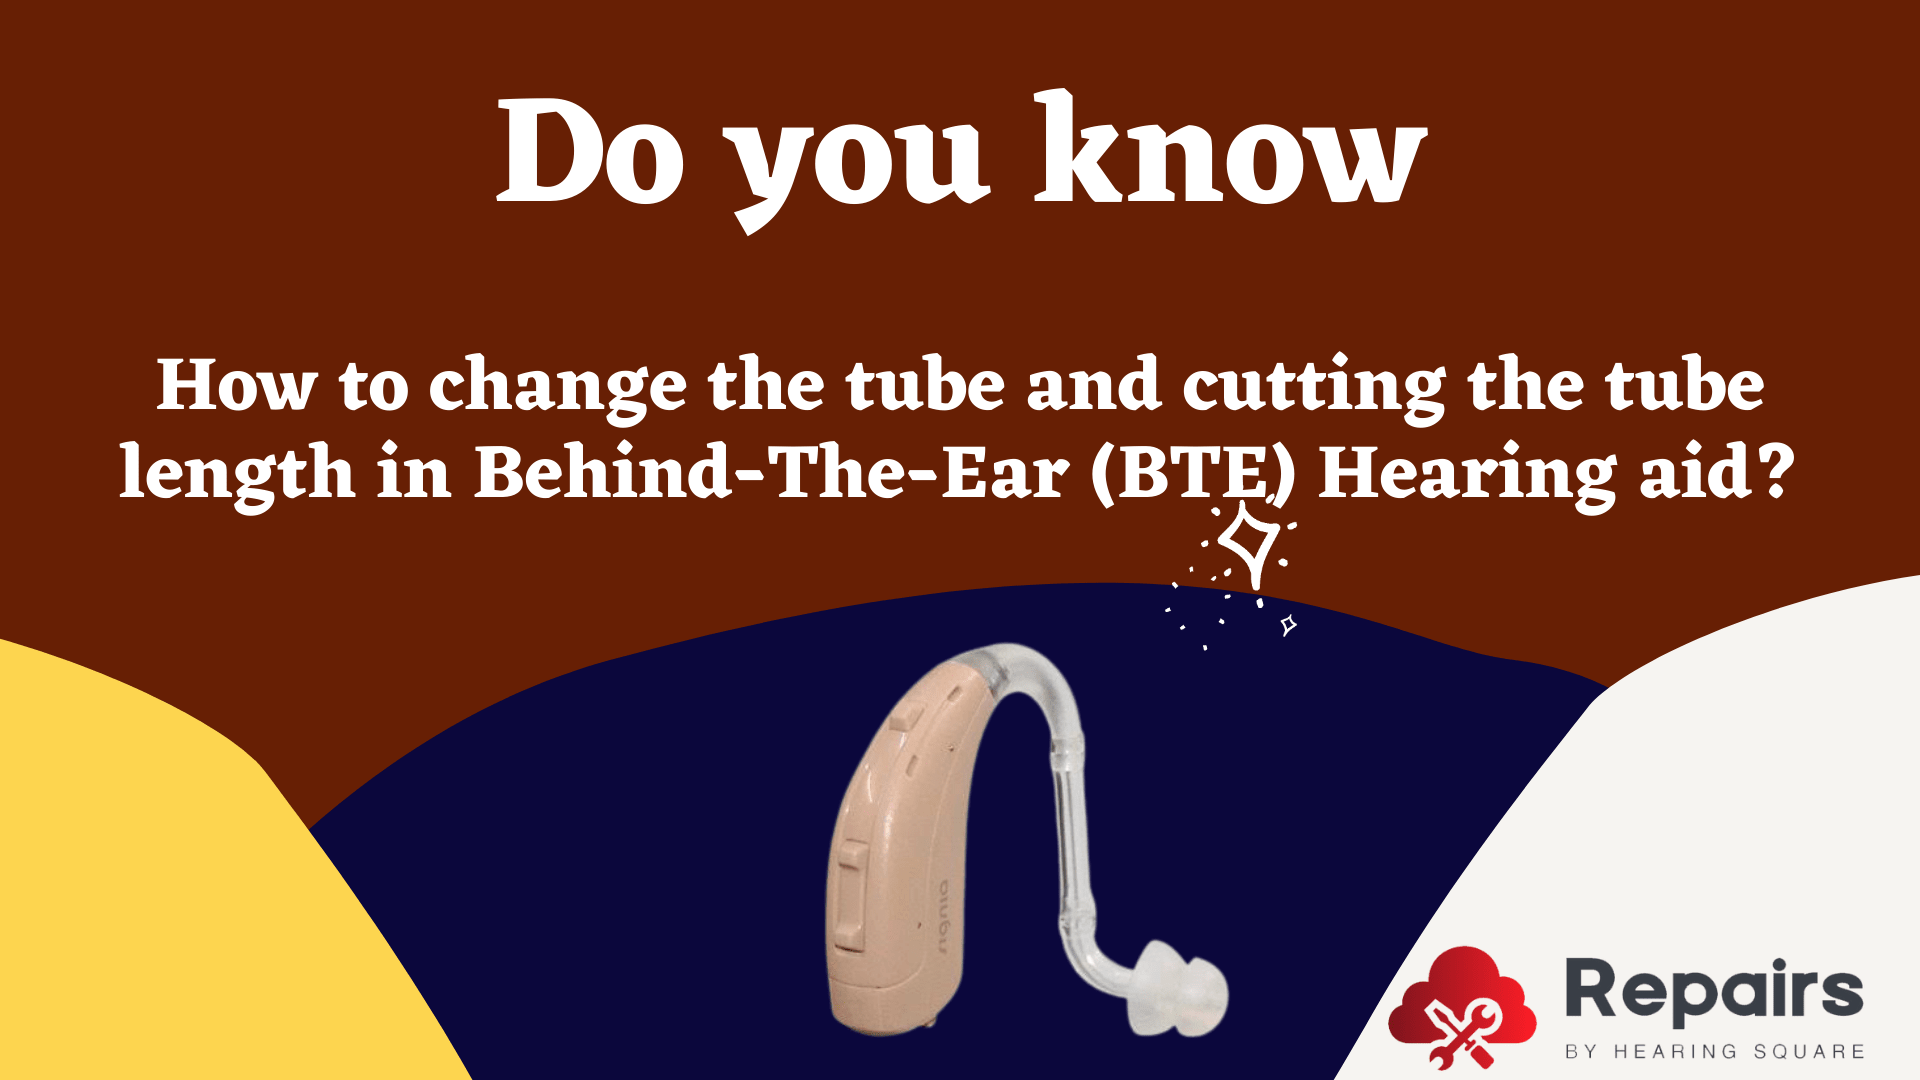 How to change the tube and cutting the tube length in Behind-The-Ear (BTE) Hearing aid